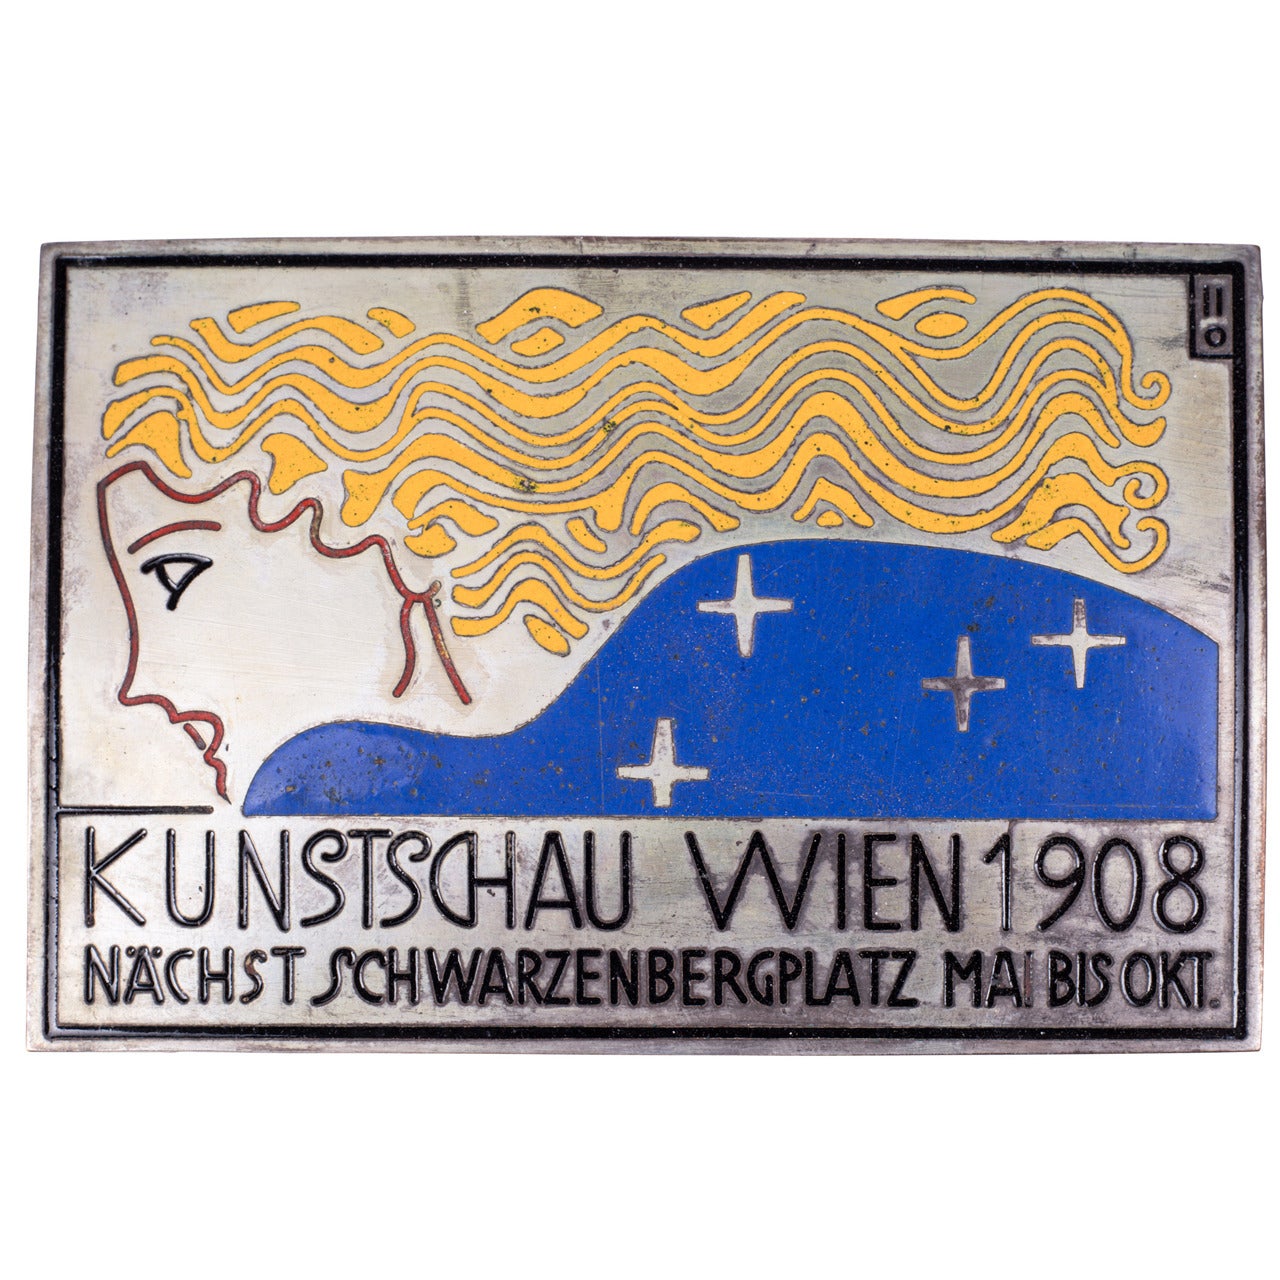 Viennese Arts and Crafts Enameled Plaque, Silver Gilded Copper, circa 1908